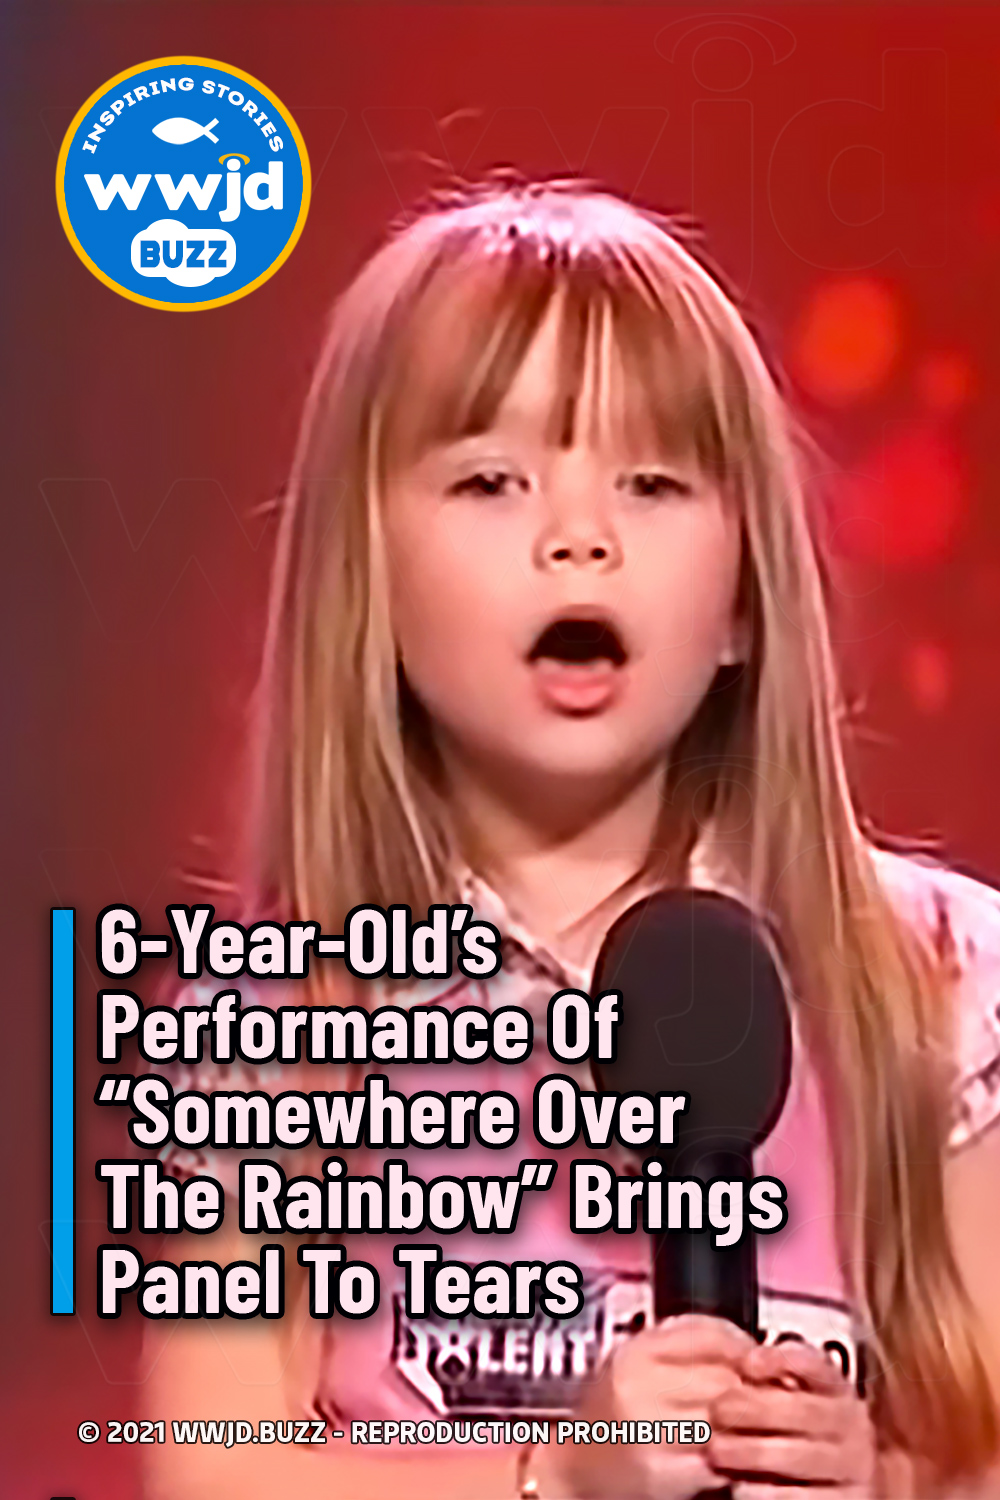 6-Year-Old’s Performance Of “Somewhere Over The Rainbow” Brings Panel To Tears